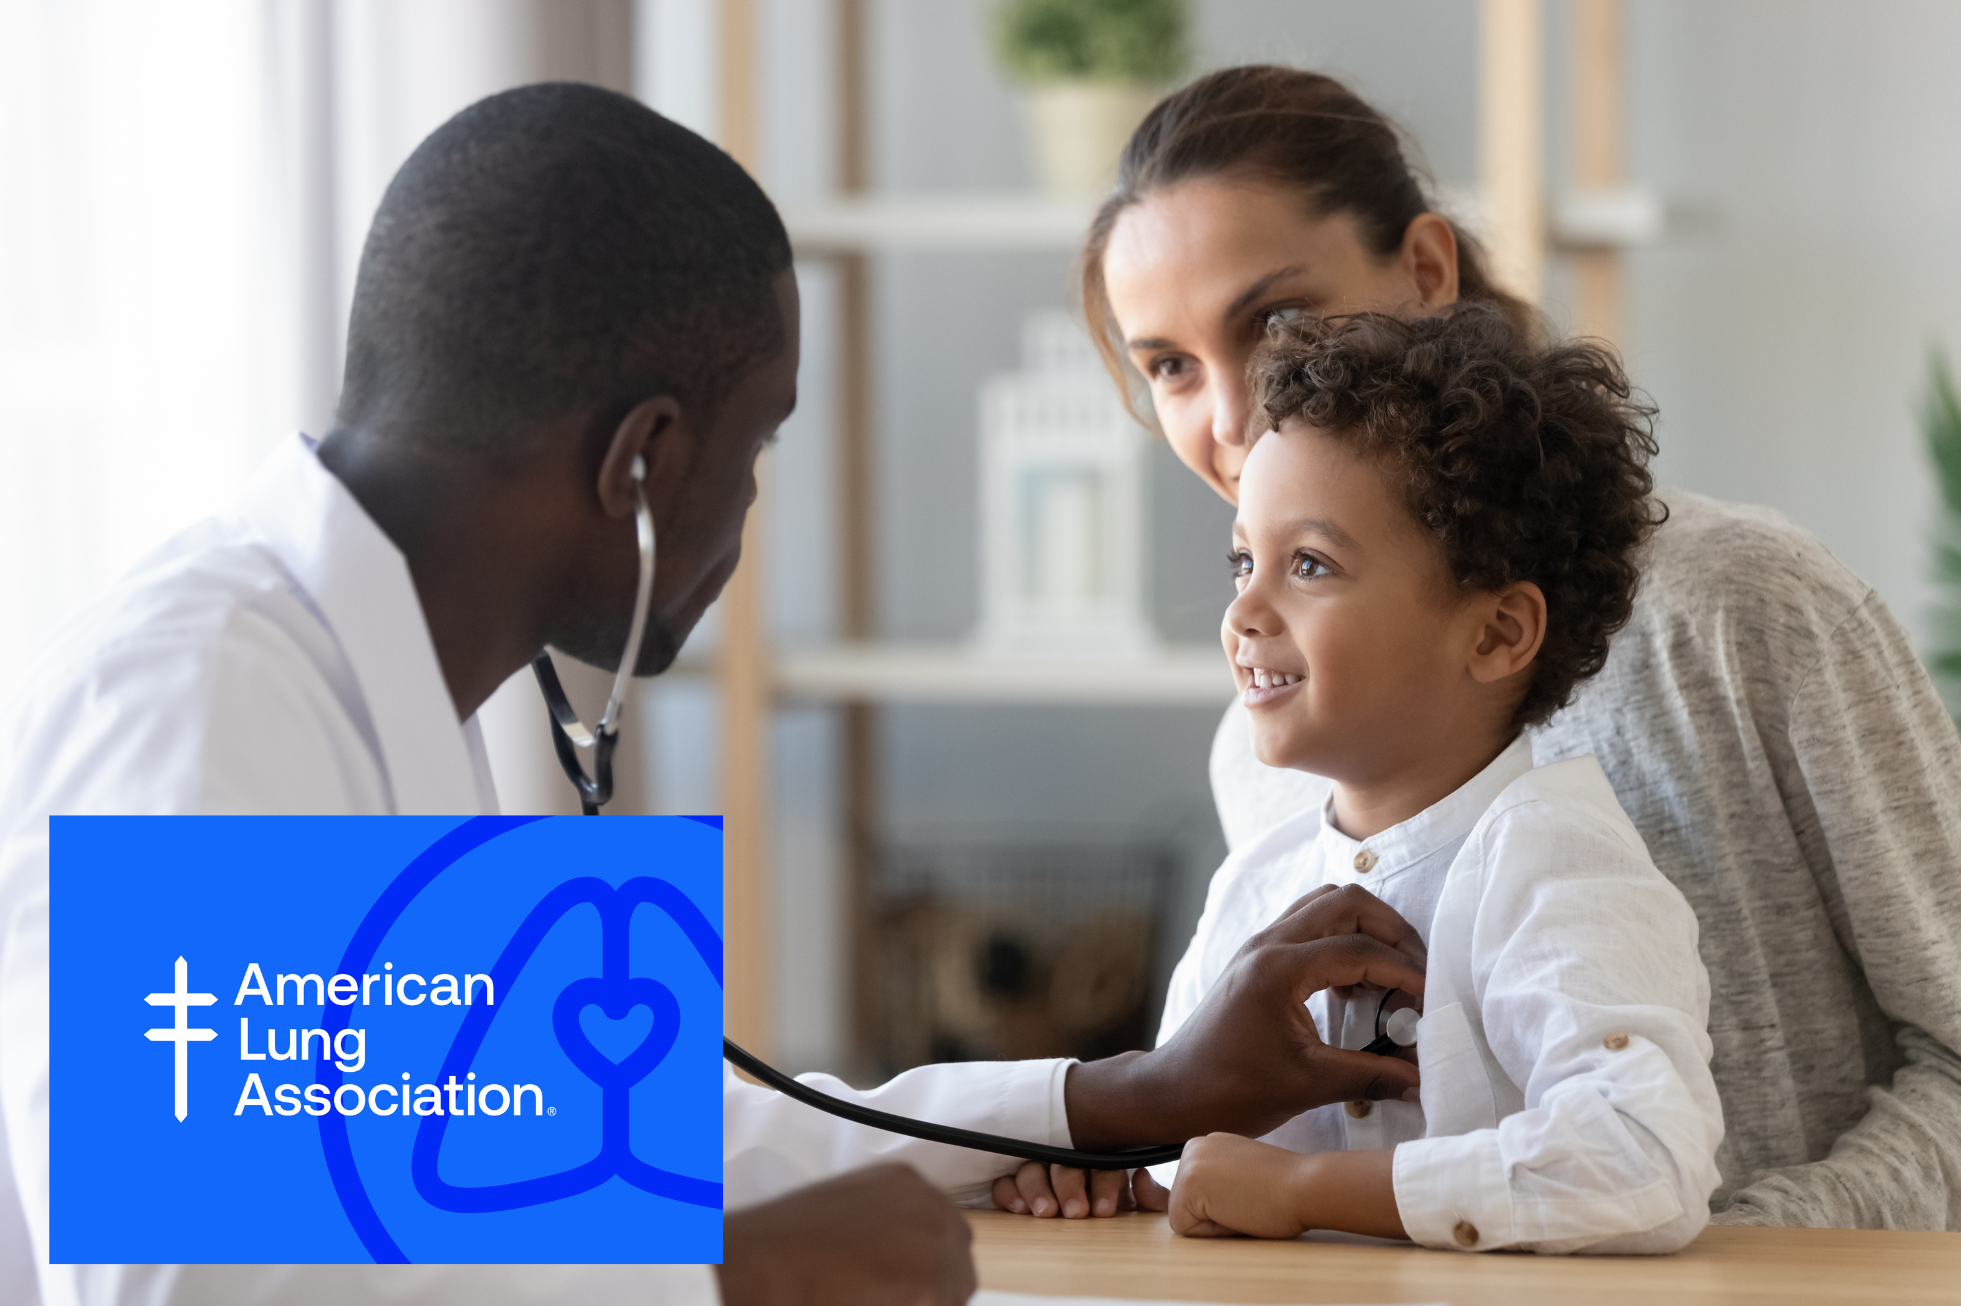 A child at a doctor's visit with his mother, featuring the logo of the American Lung Association, a Veritus client.